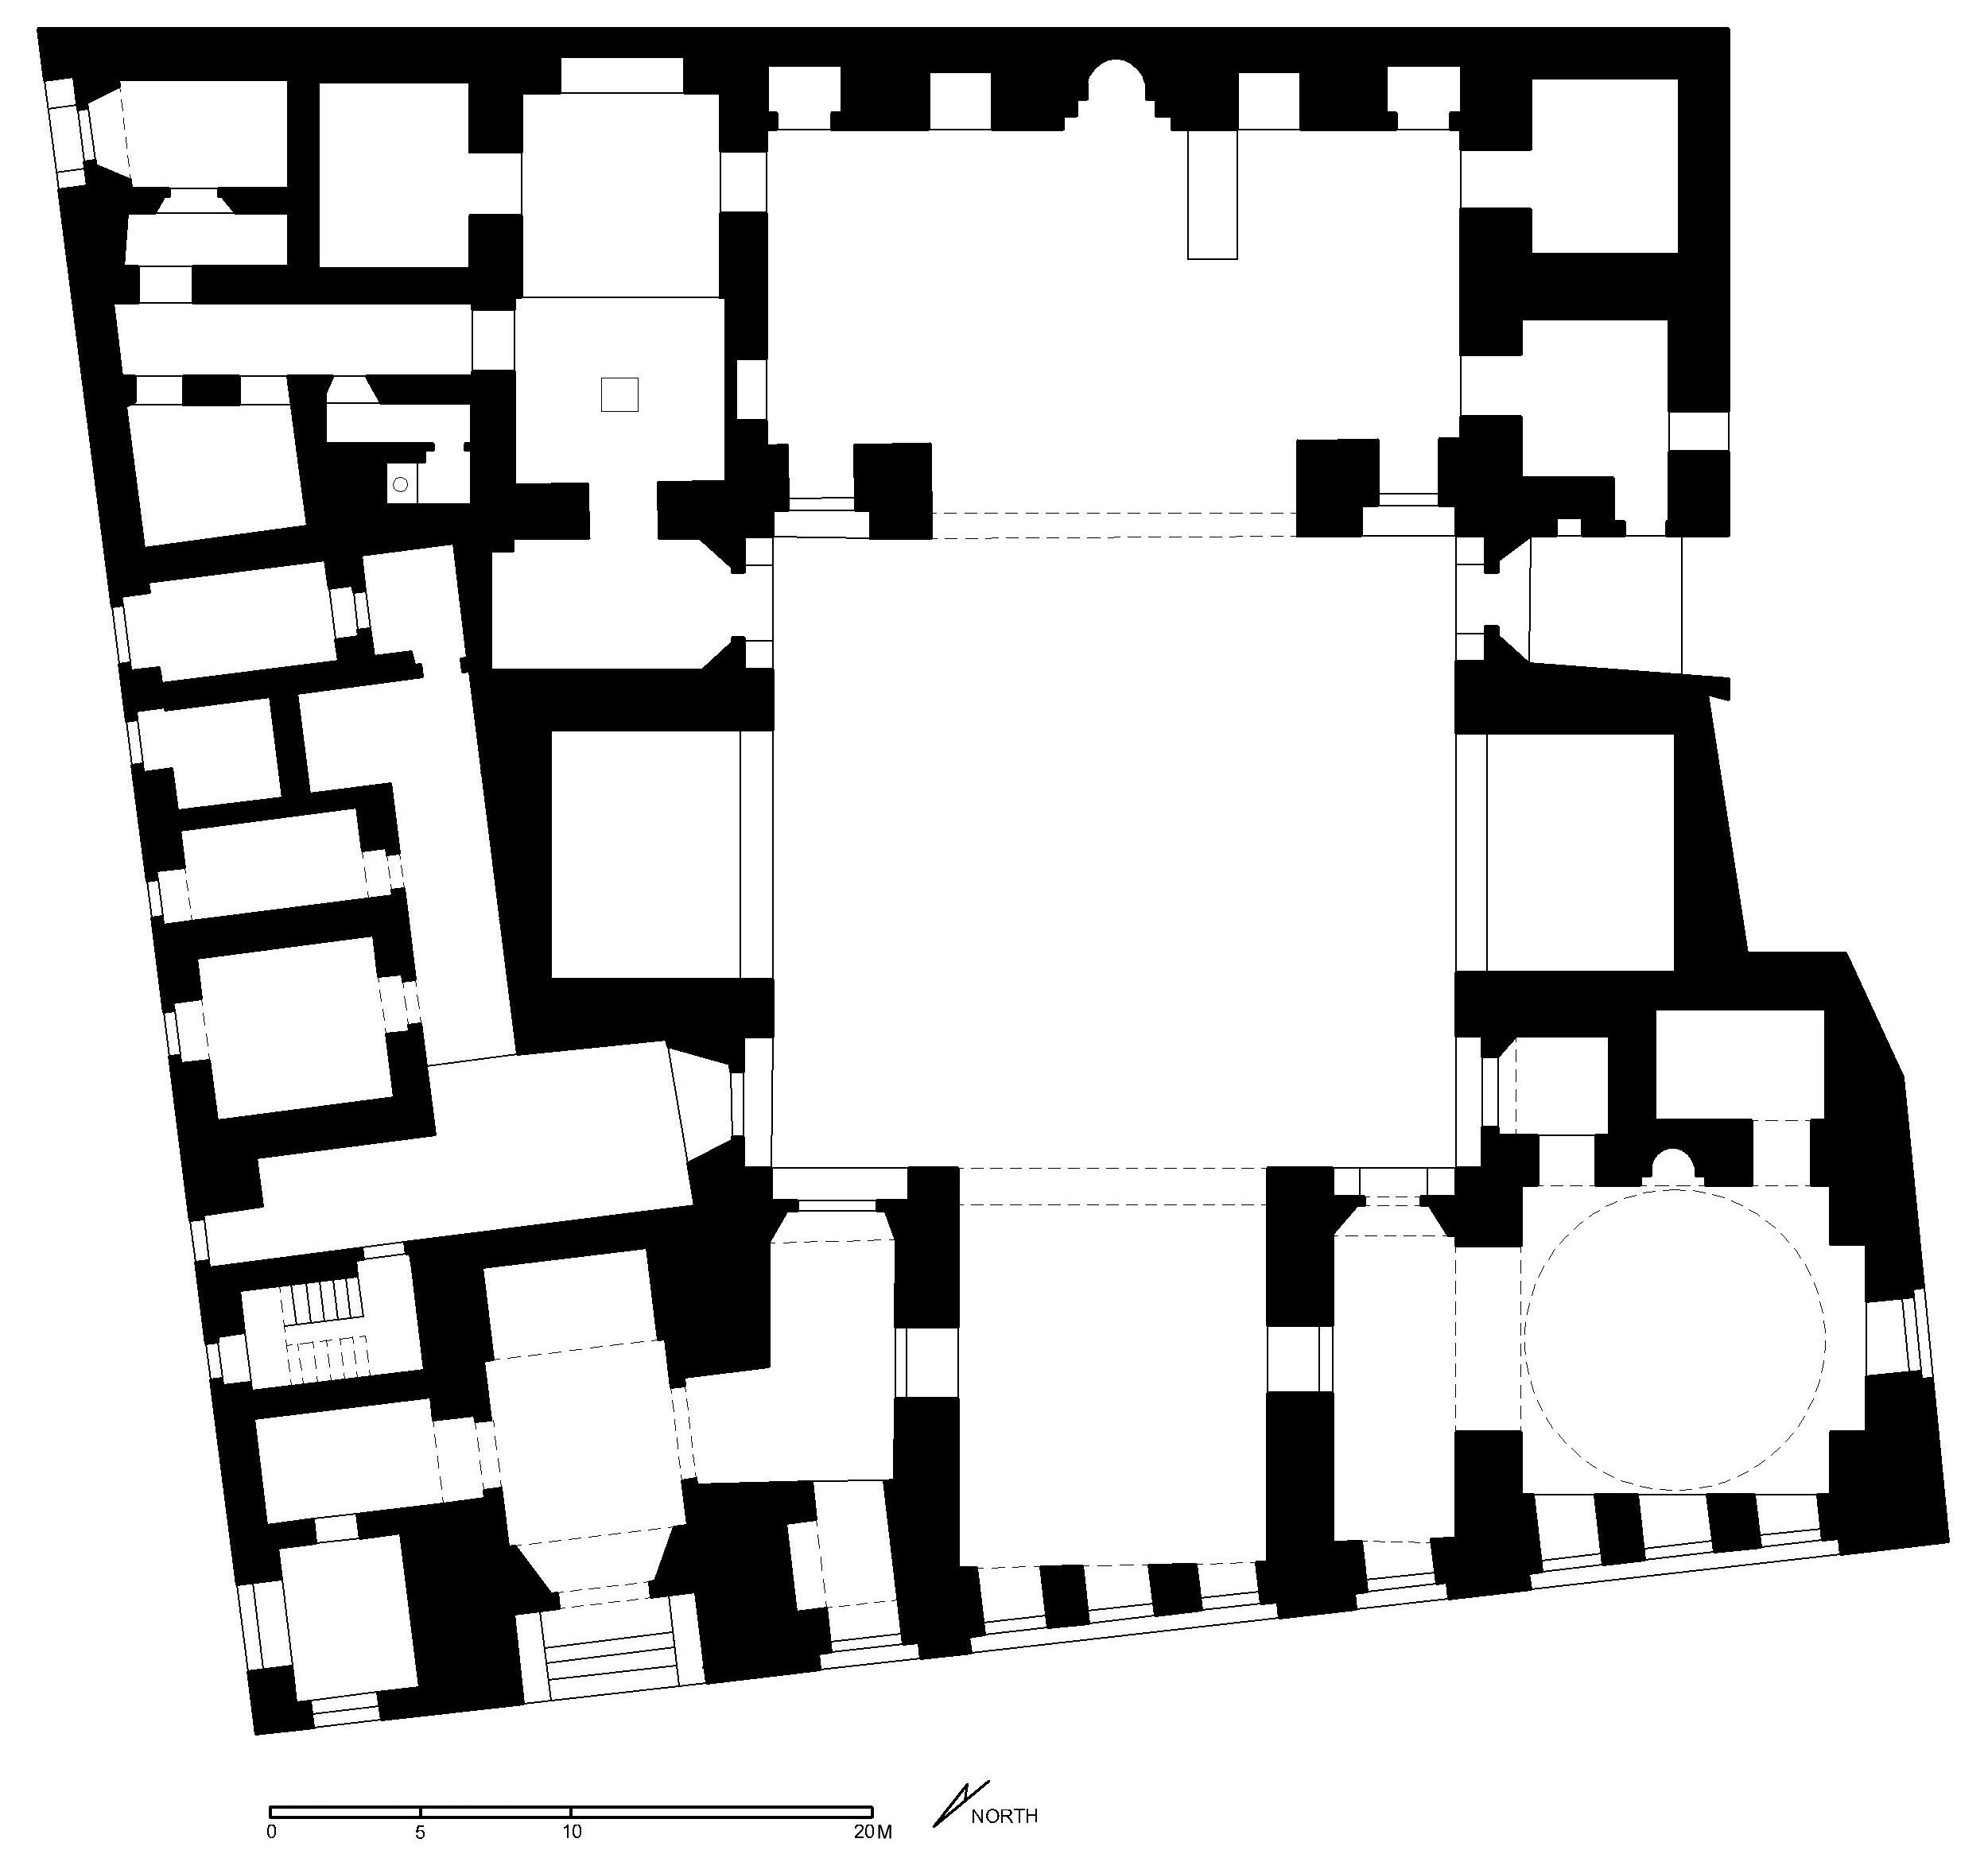 Madrasa Iljay al-Yusufi - Floor plan of the madrasa complex (after Meinecke) in AutoCAD 2000 format. Click the download button to download a zipped file containing the .dwg file. 